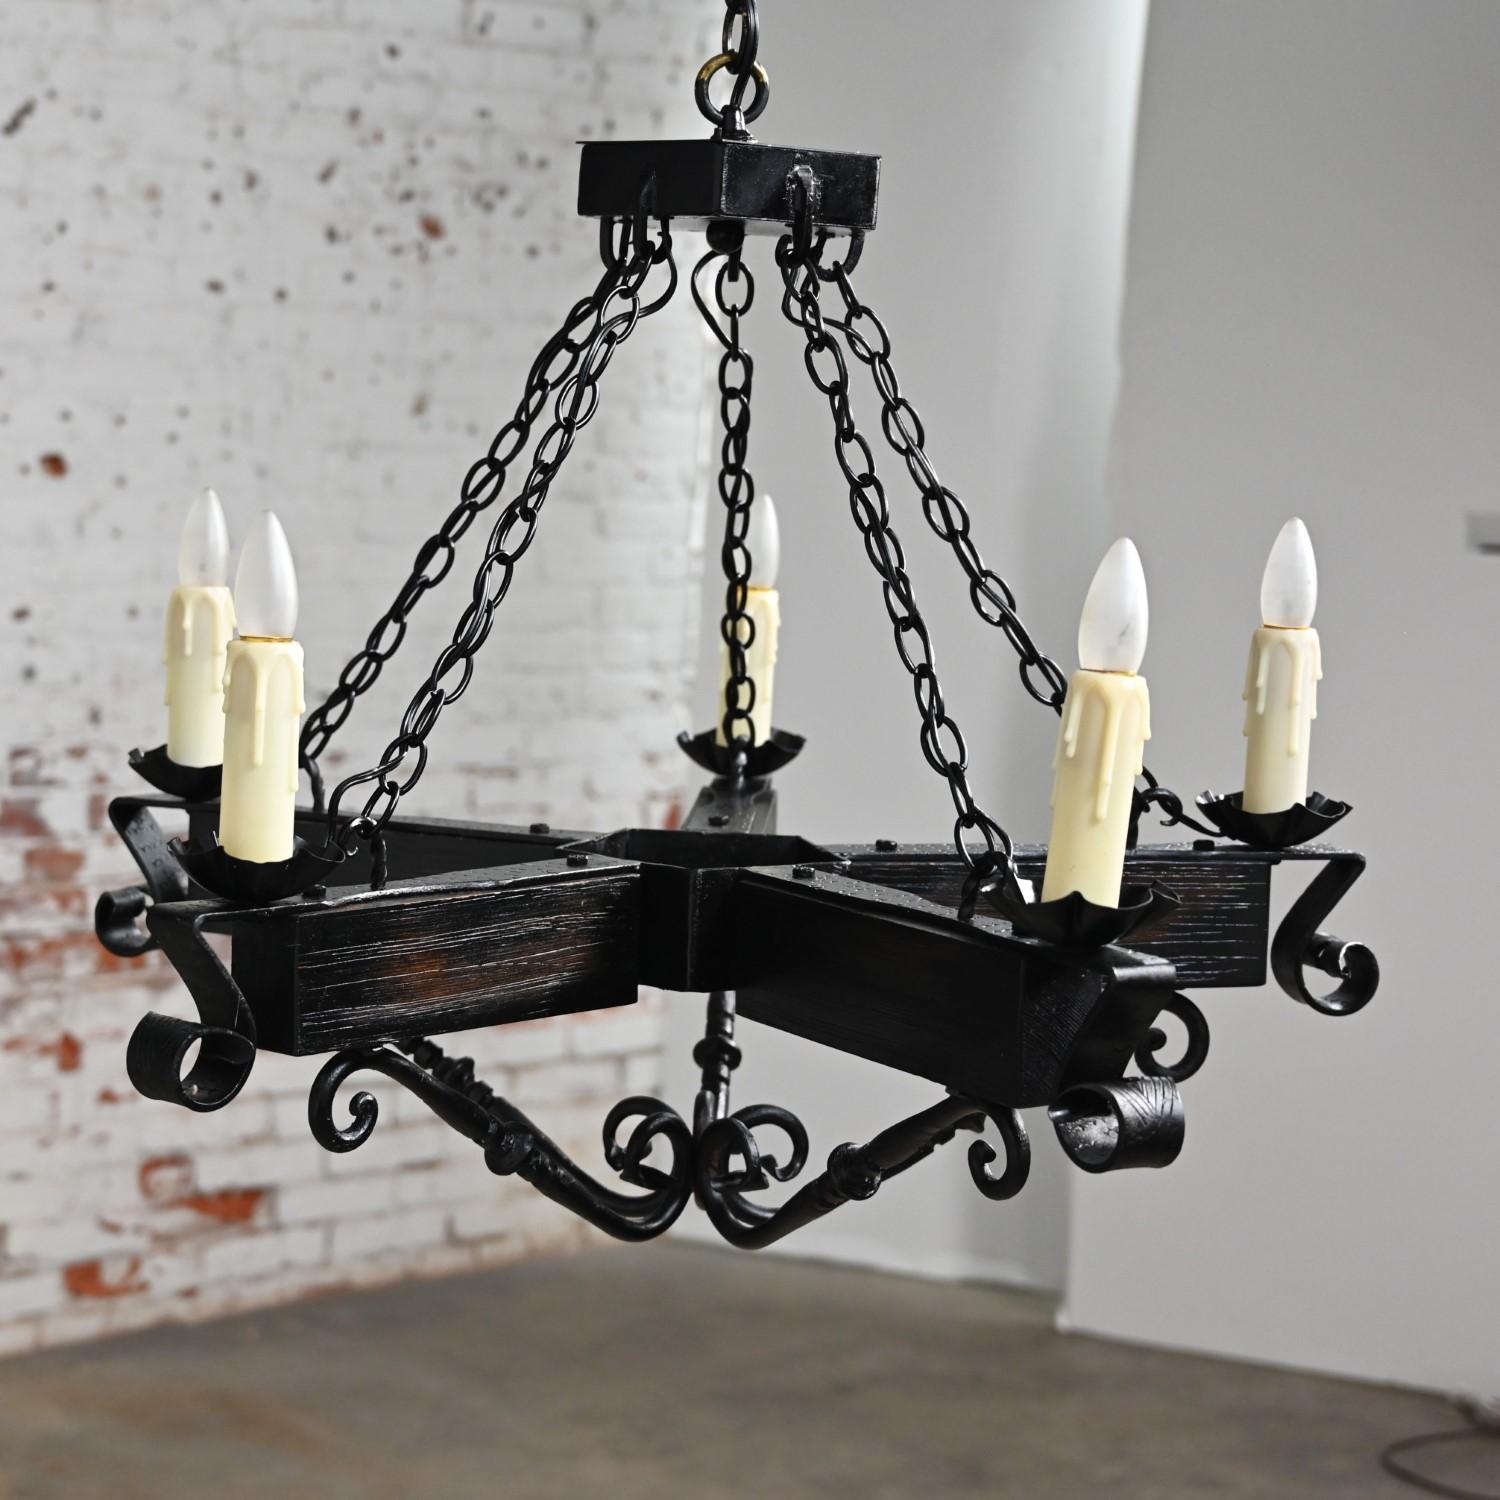 John C Virden Medieval Gothic or Spanish Revival Style Hanging Light Fixture  For Sale 3